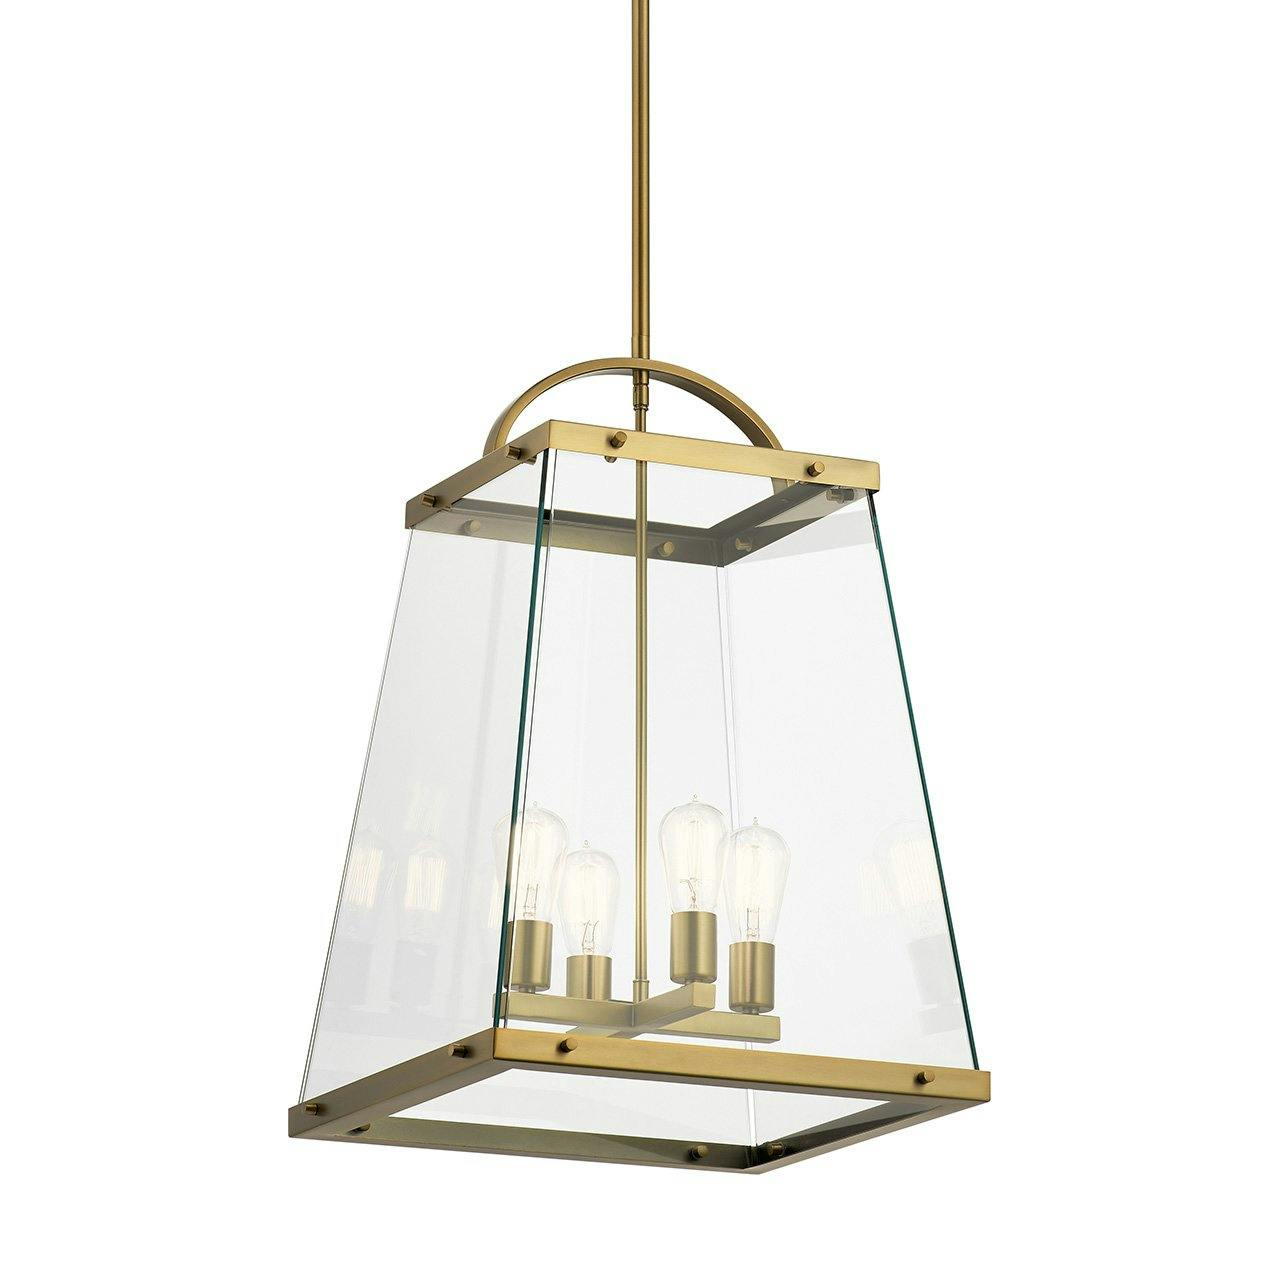 Darton 25.75" 4 Light Large Pendant Brass without the canopy on a white background